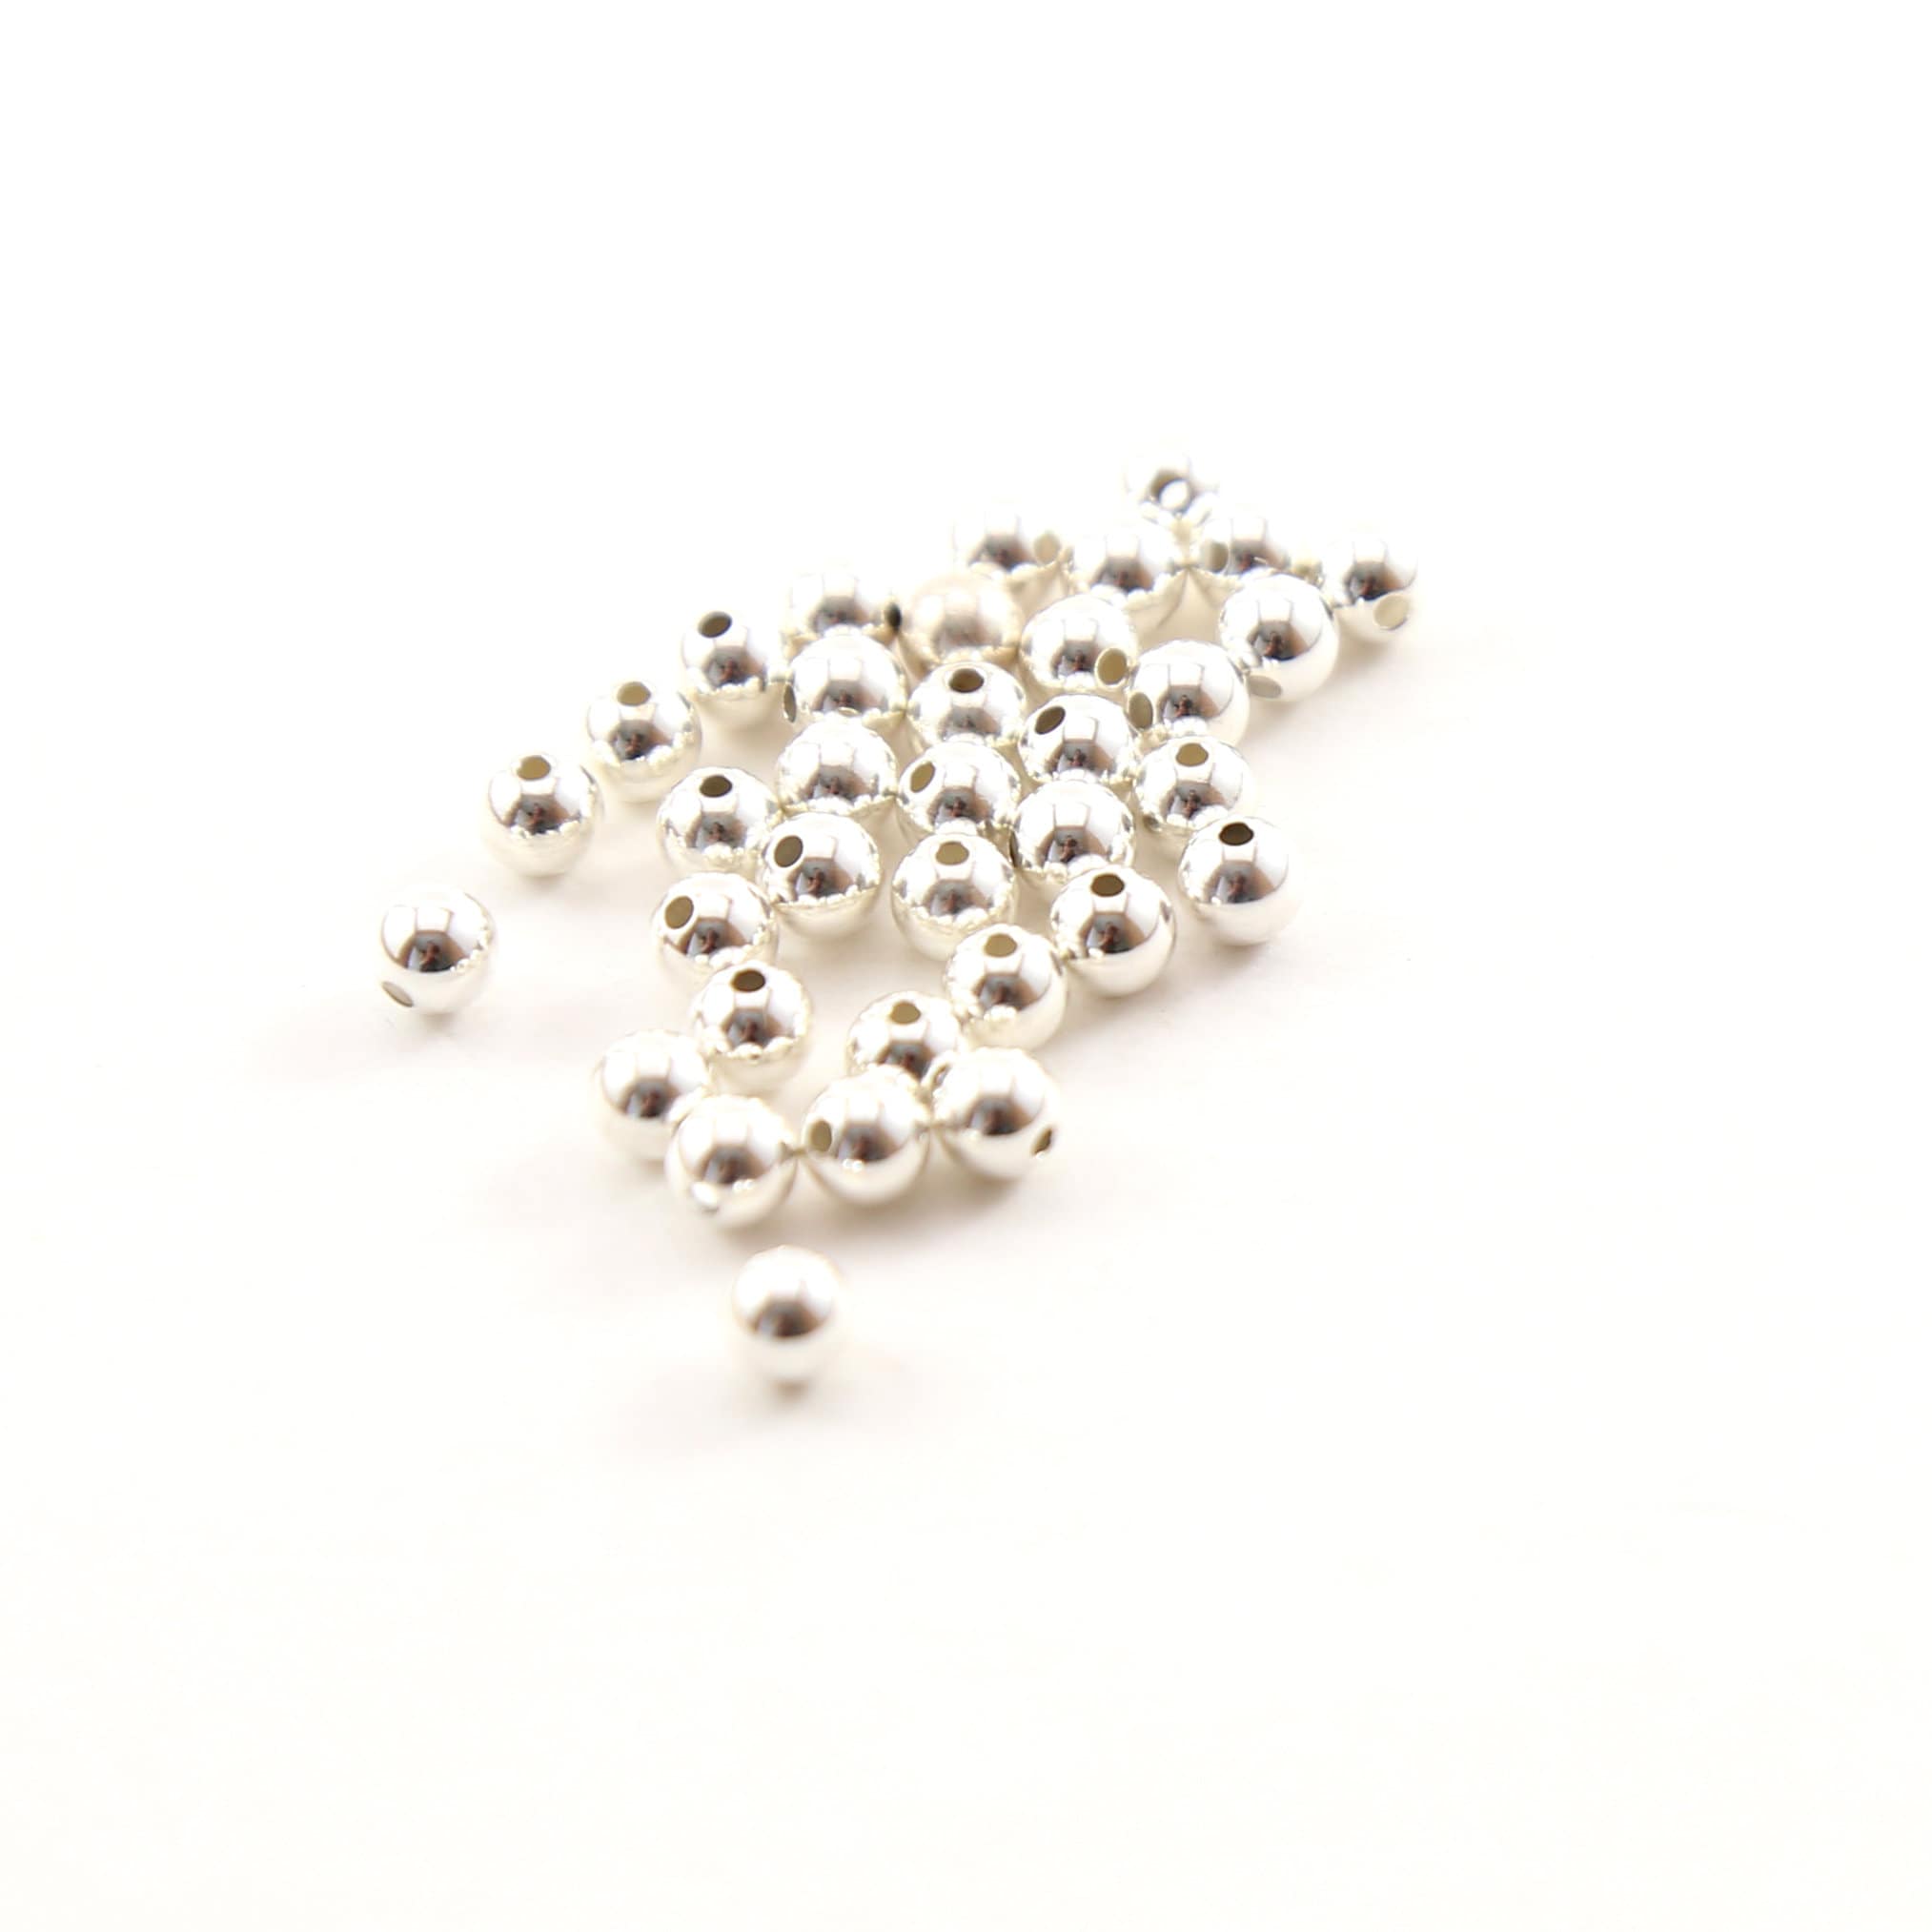 1pc 16mm 925 Silver Seamless Beads, Round Silver Beads, Spacer